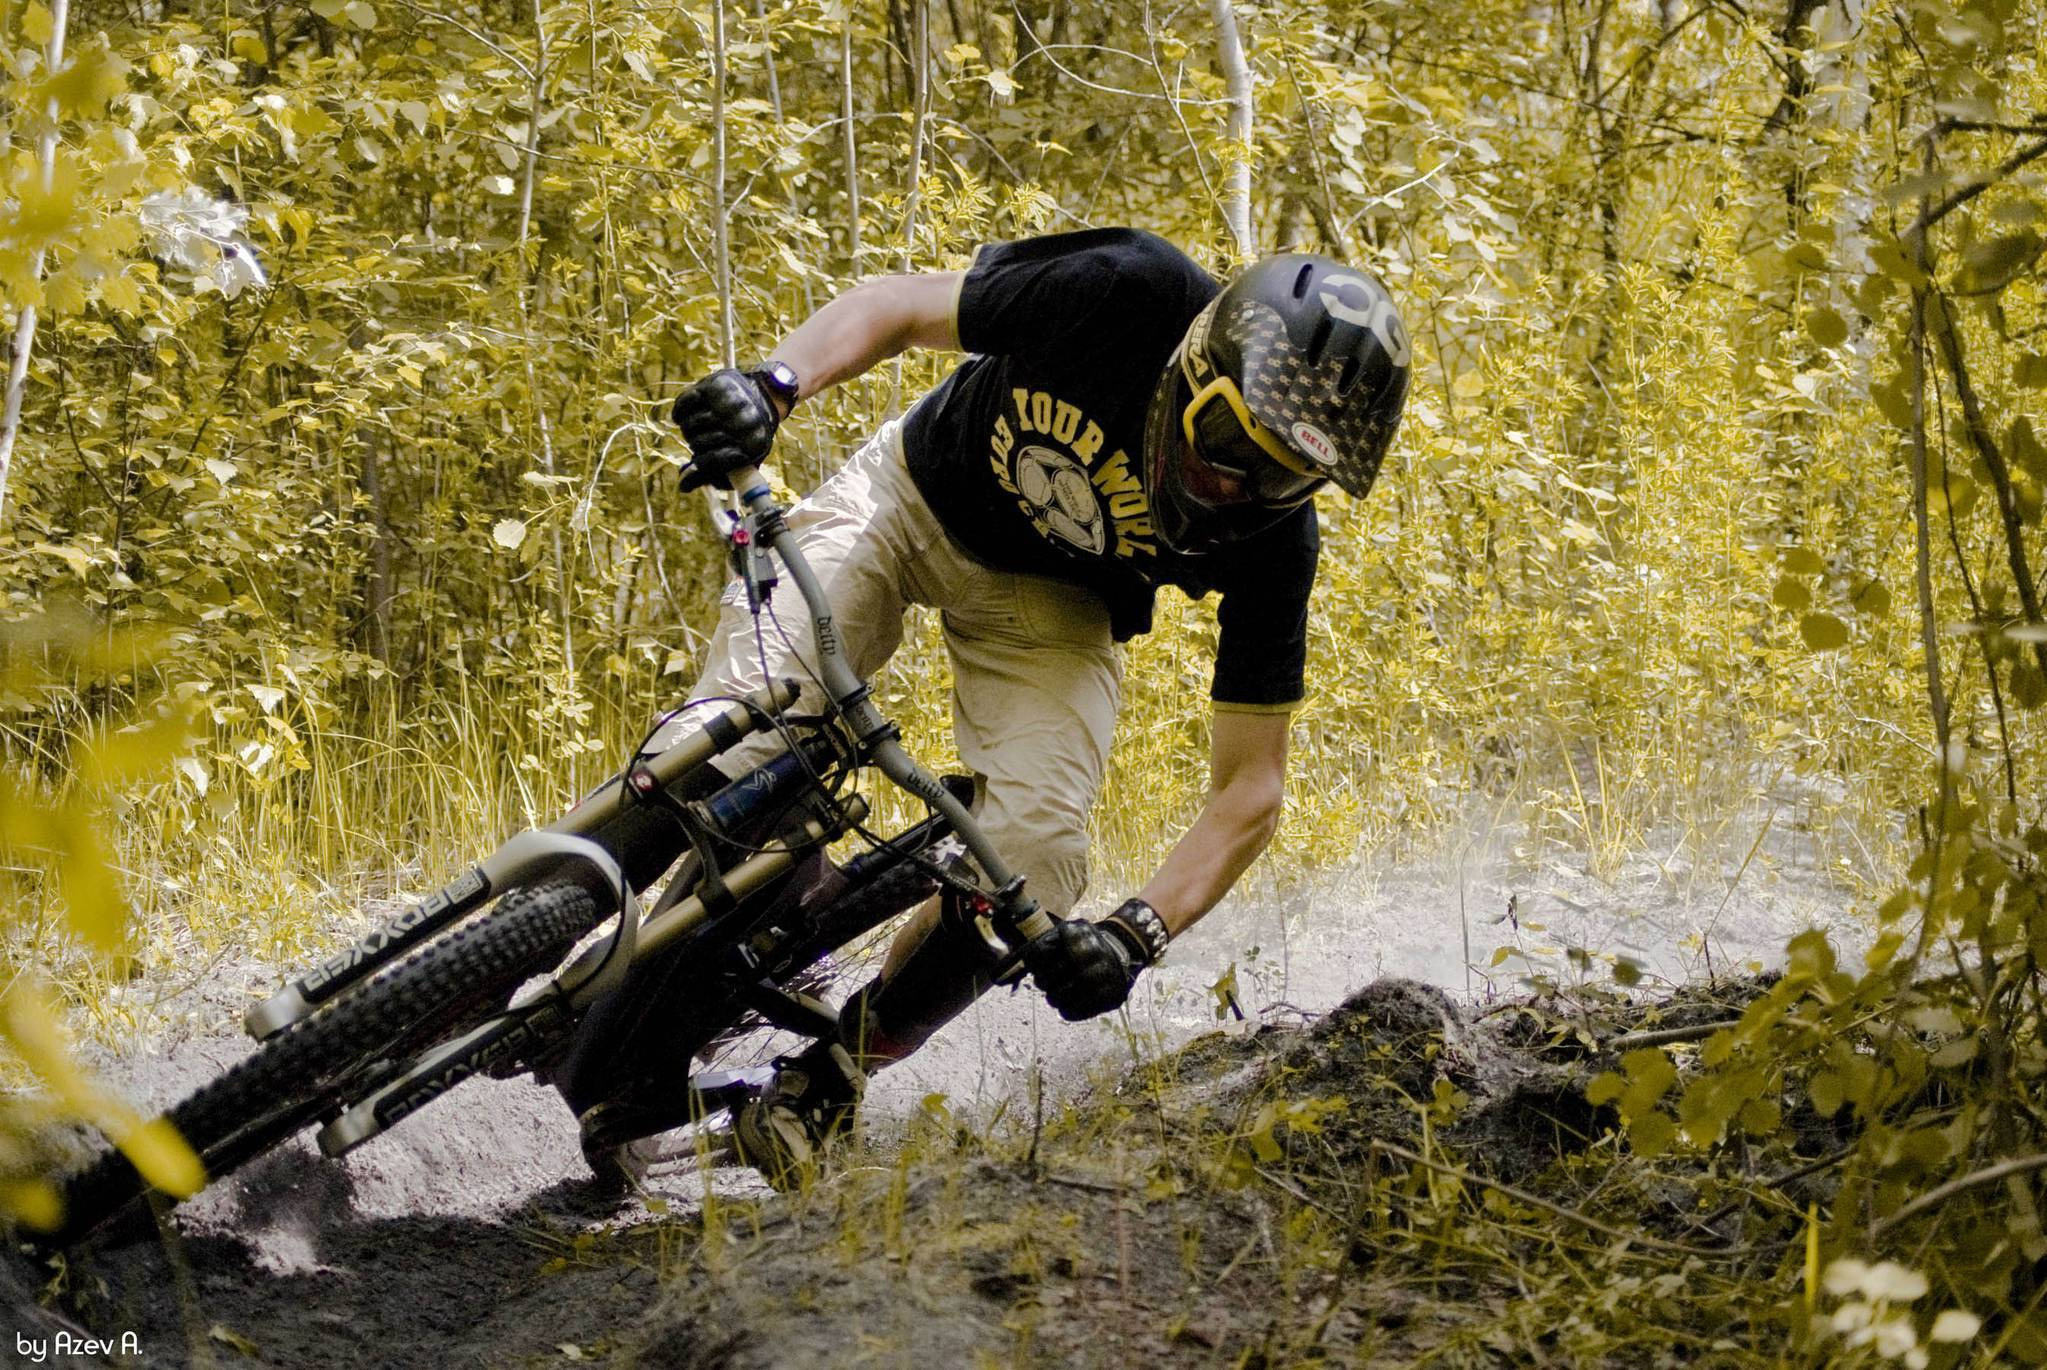 Mountain bike racing on a thrilling sports trail.